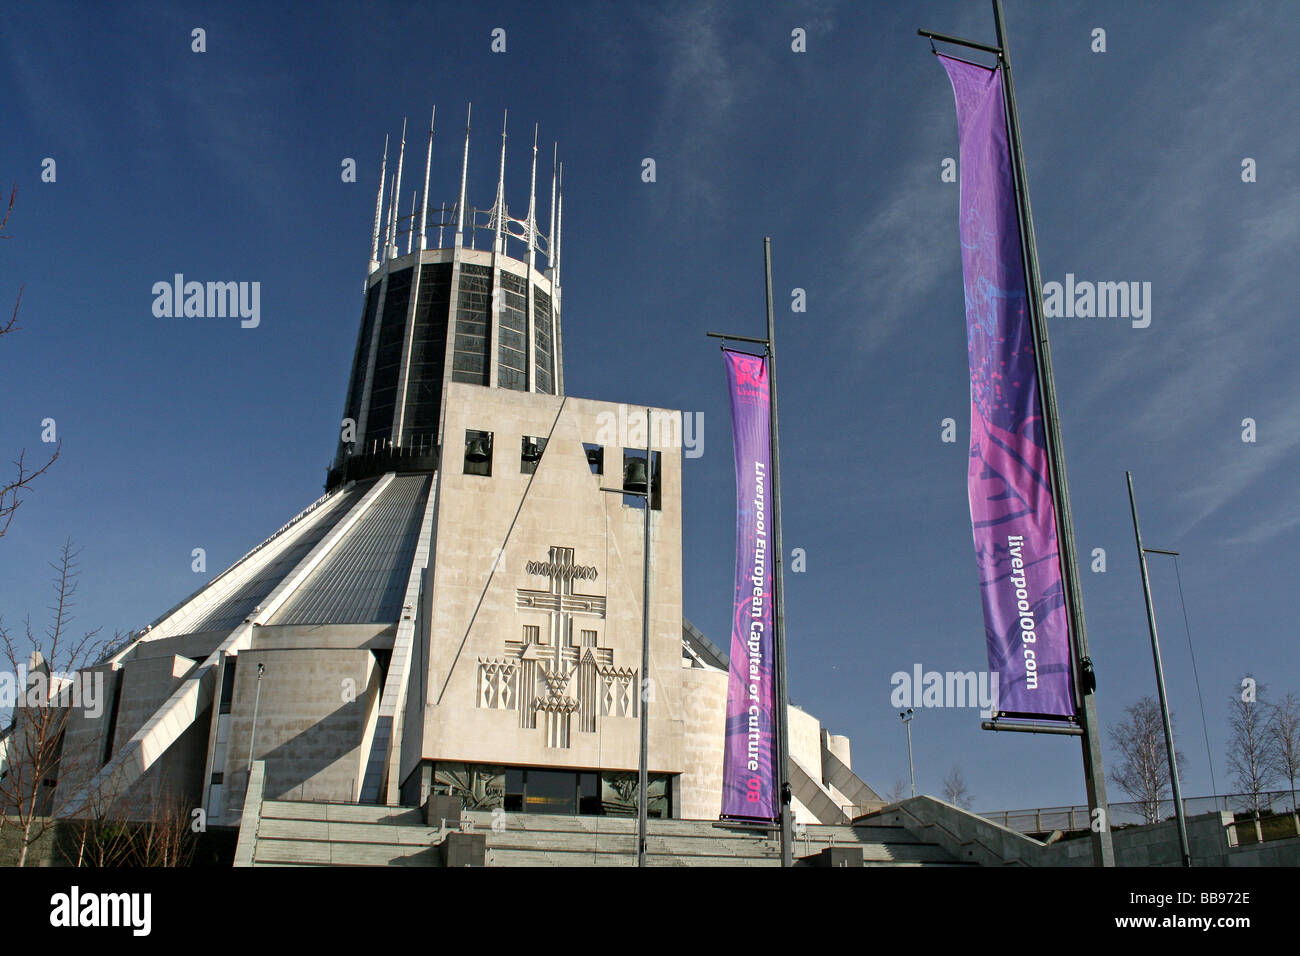 Capital Of Culture Flags Outside The Liverpool Metropolitan Cathedral of Christ the King, Merseyside, UK Stock Photo